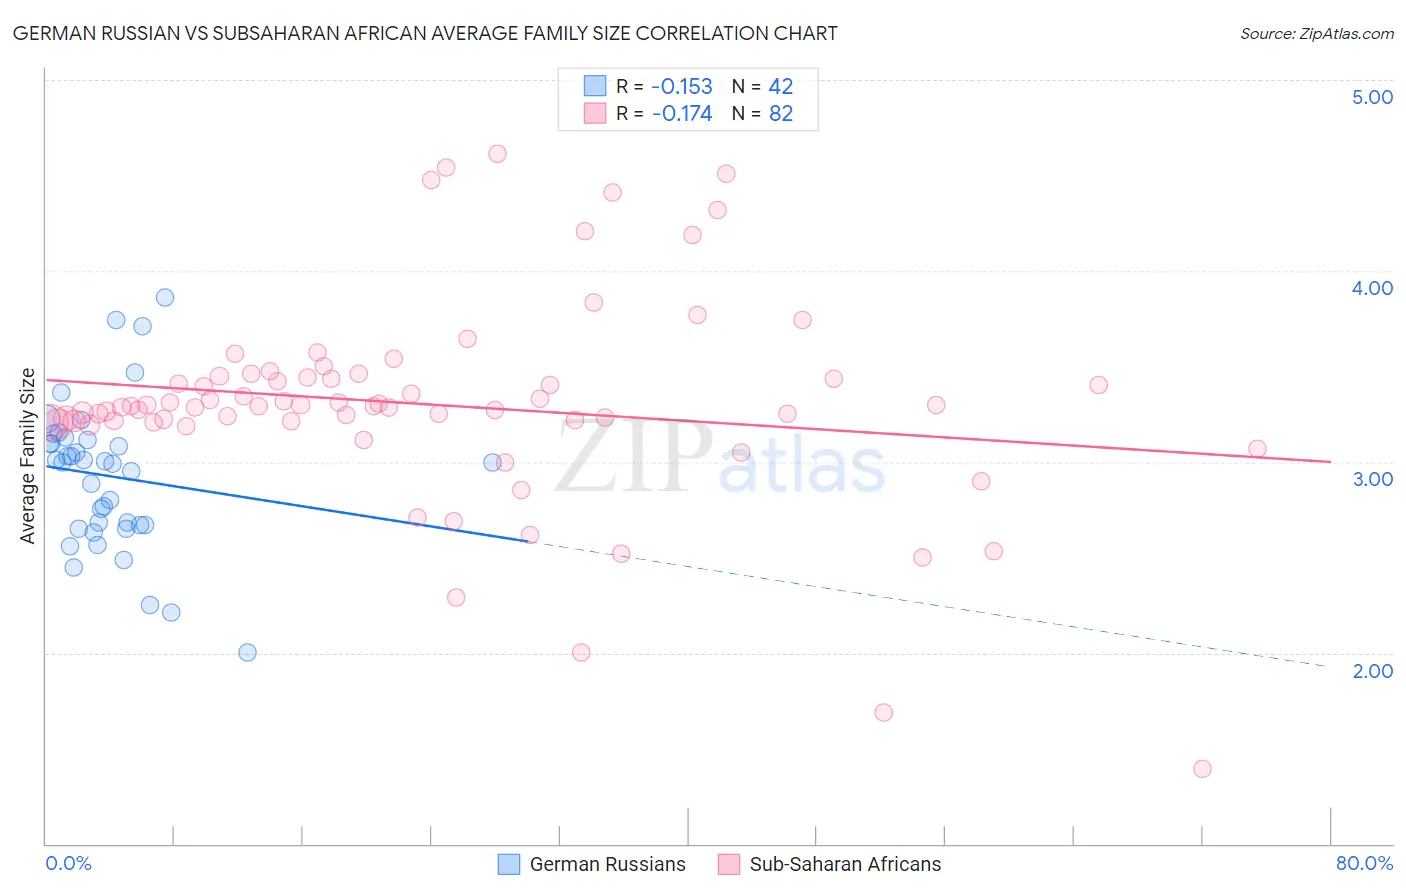 German Russian vs Subsaharan African Average Family Size